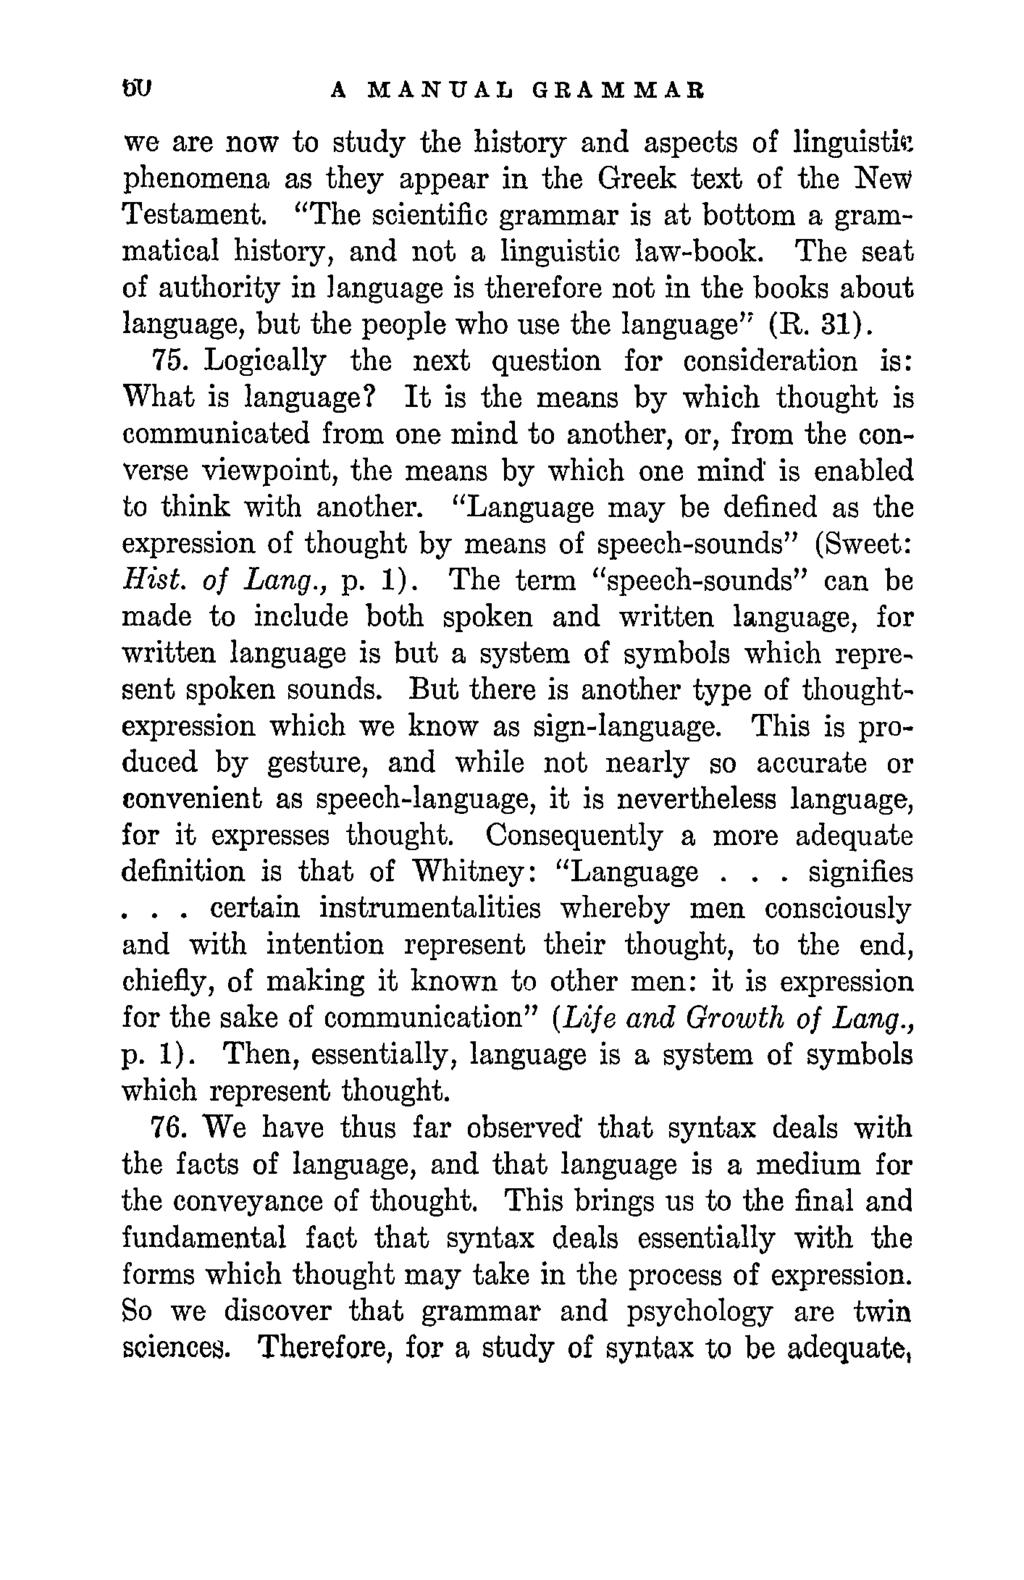 A MANUAL GRAMMAR we are now to study the history and aspects of linguistic phenomena as they appear in the Greek text of the Ne-W Testament.